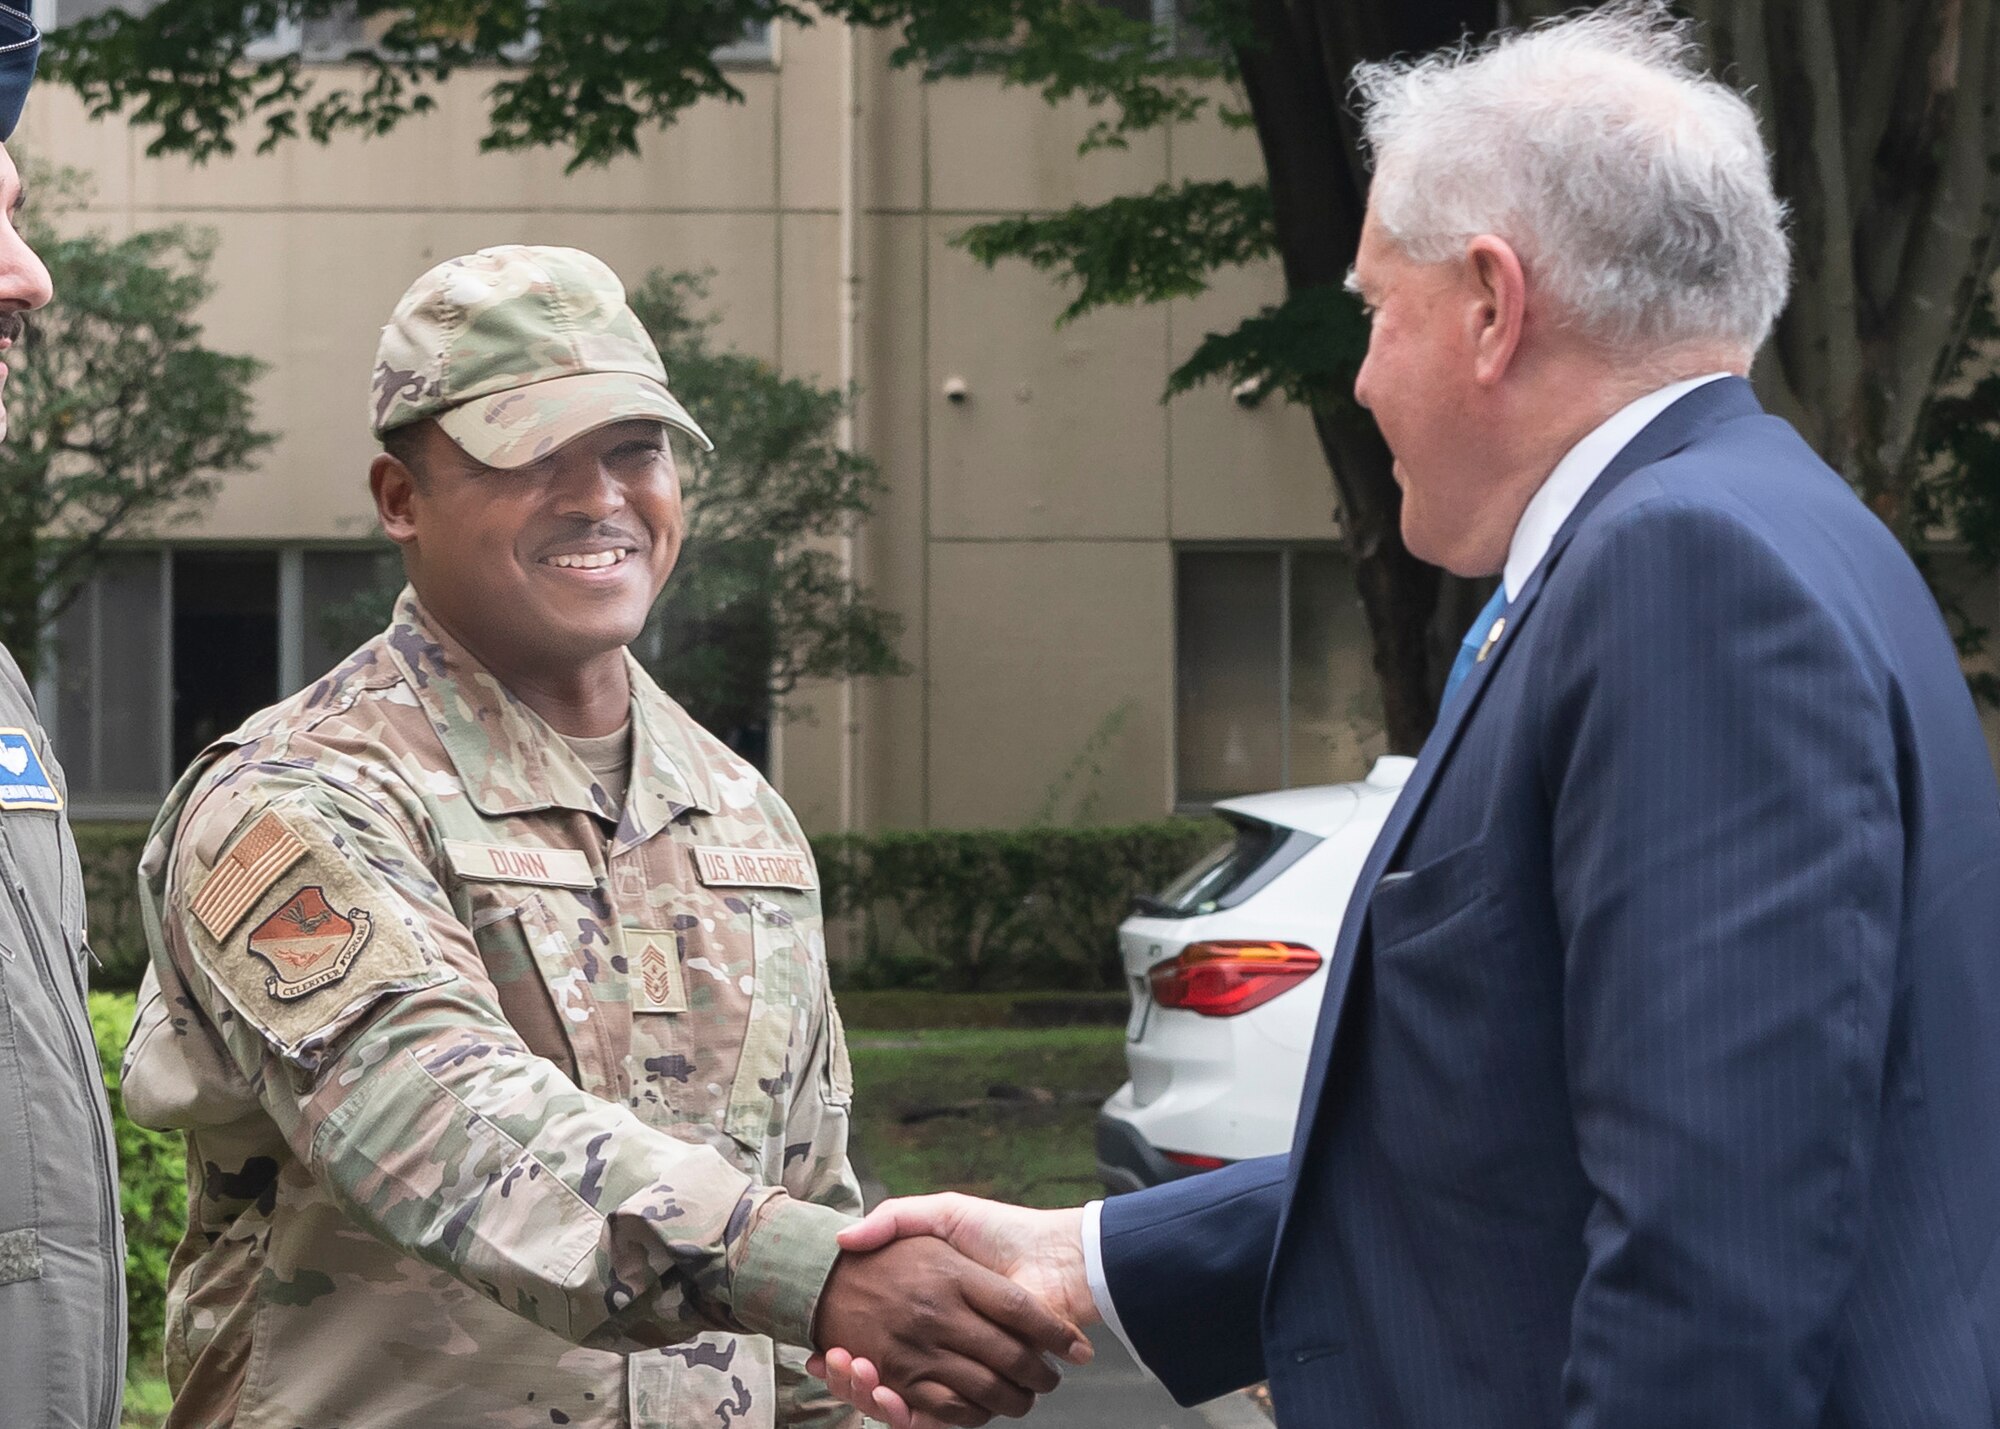 Chief Master Sgt. Jerry Dunn, 374th Airlift Wing command chief, left, greets Secretary of the Air Force Frank Kendall during his visit to 374th Airlift Wing headquarters at Yokota Air Base, Japan, Aug. 24, 2022.